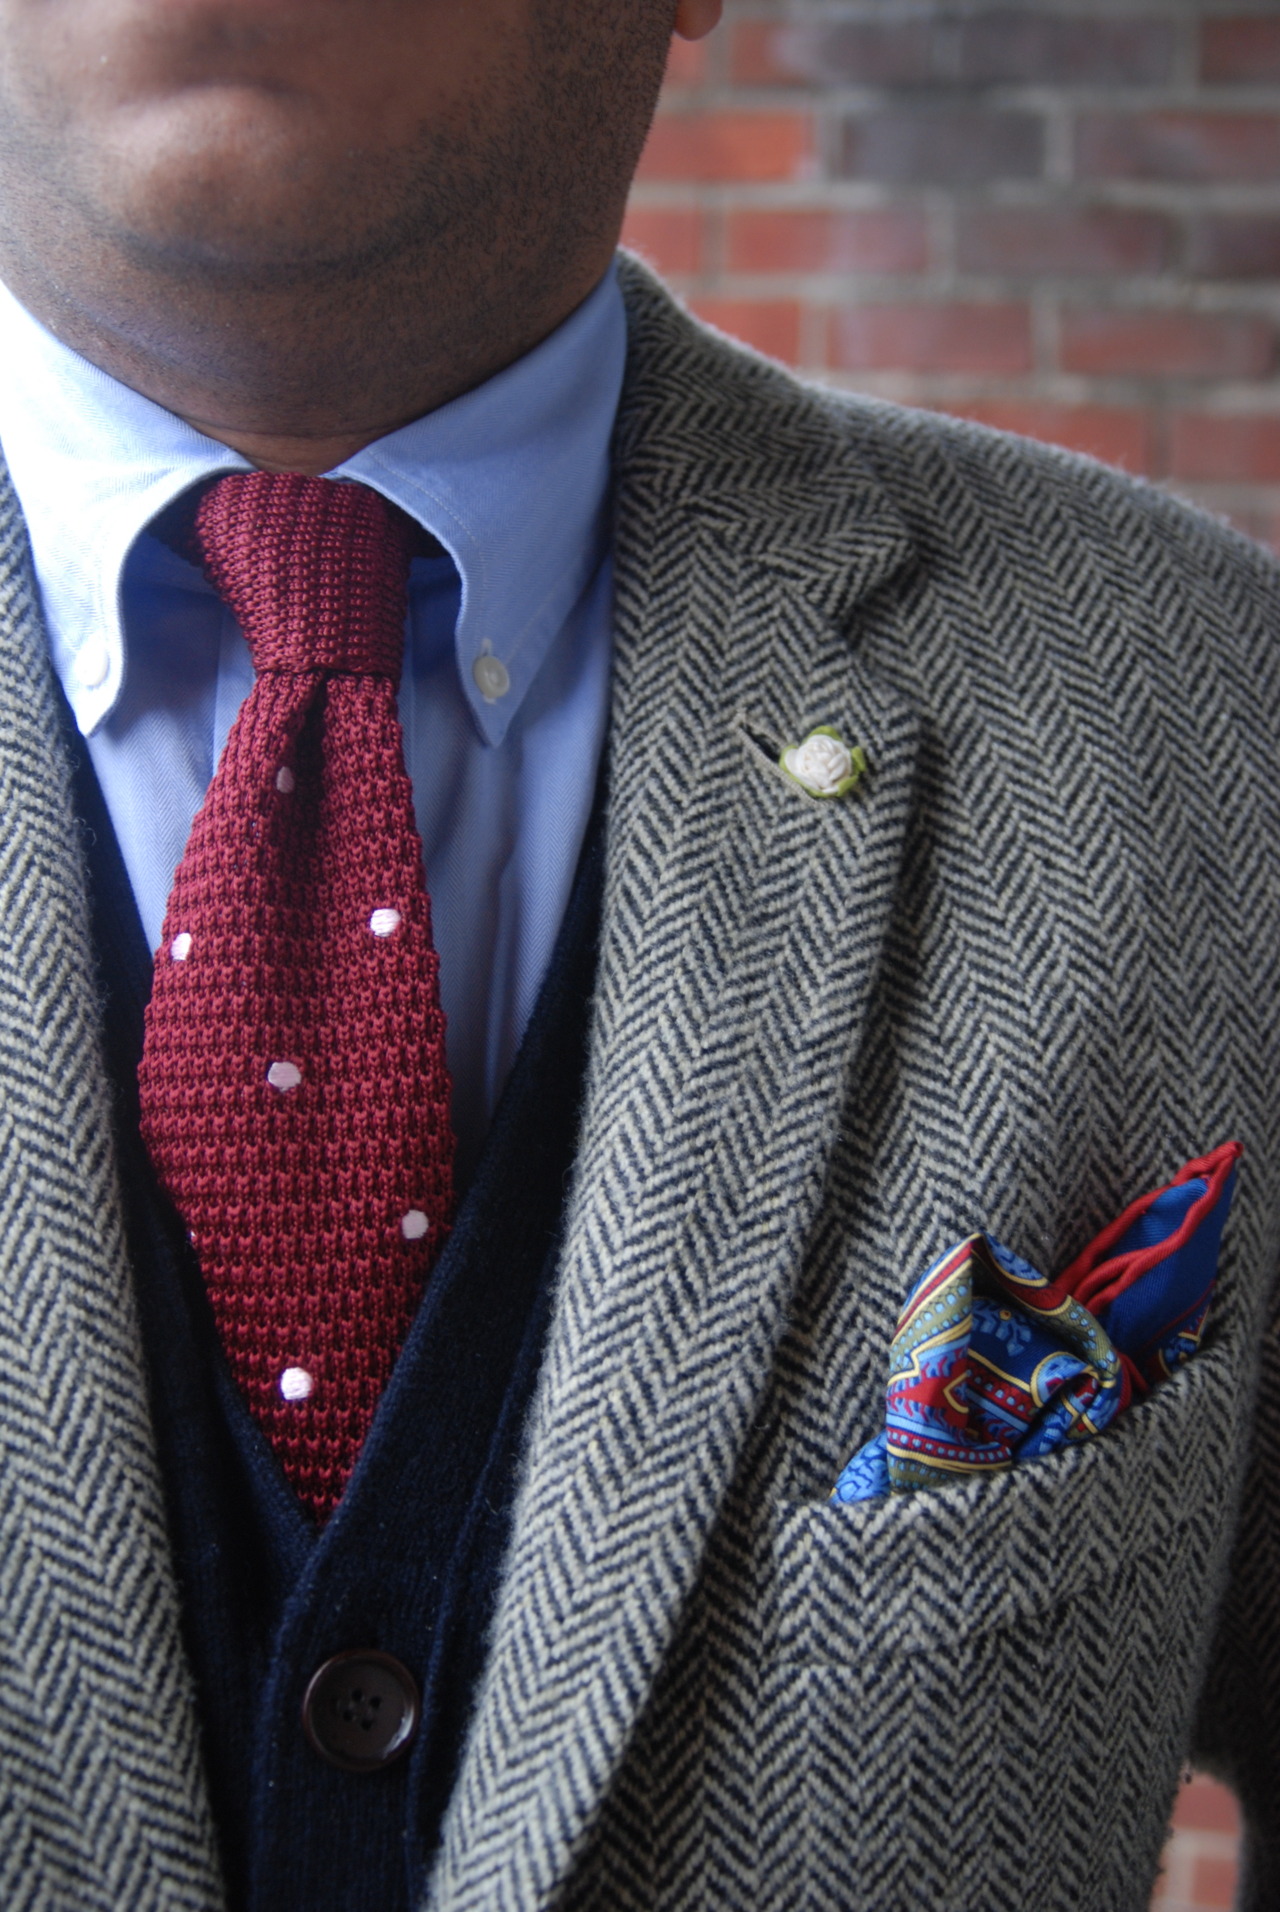 red-knitted-tie-white-lapel-pin-tweed-jacket-pocket-square-men-blue-shirt-style